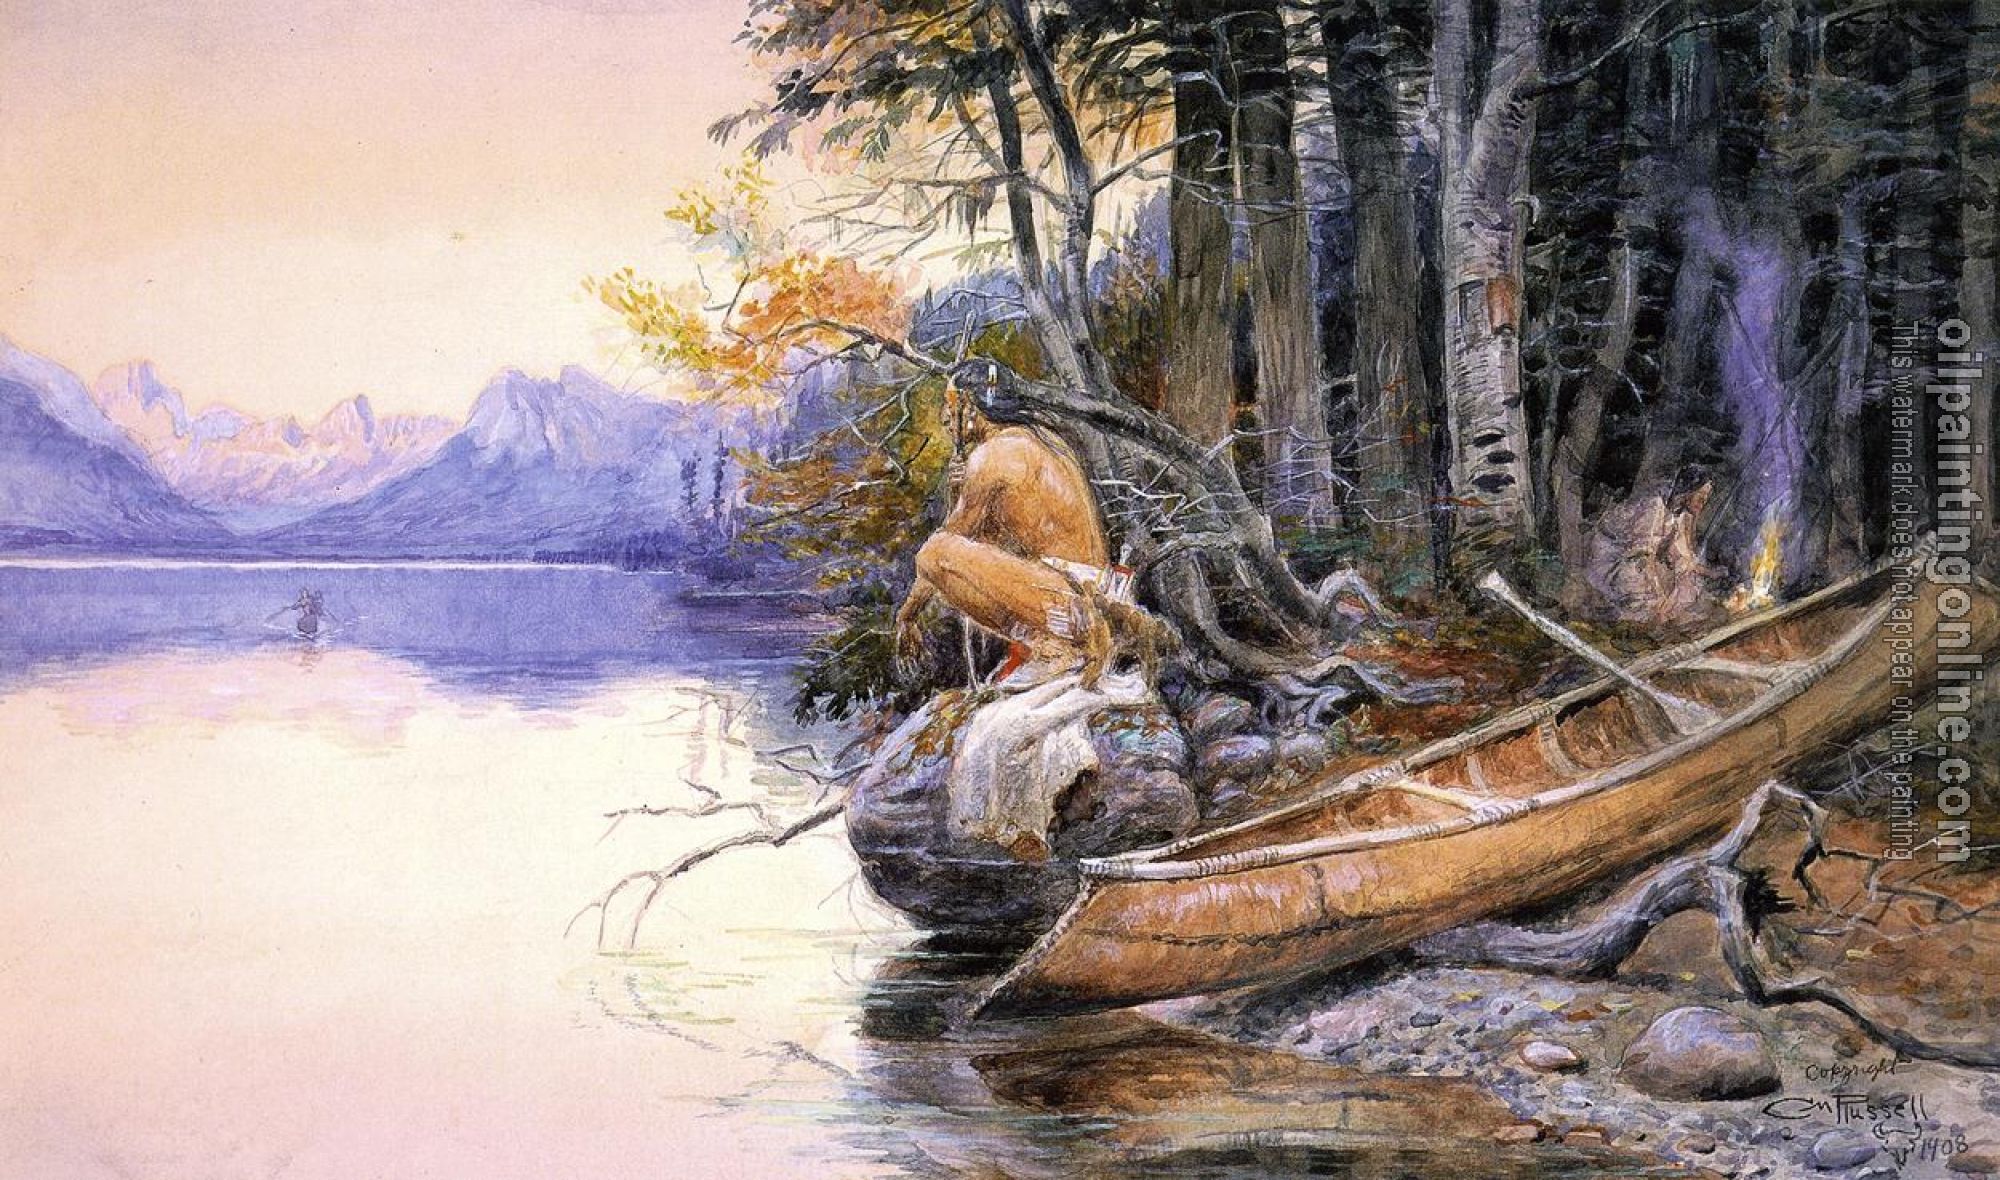 Charles Marion Russell - Indian Camp Lake McDonald